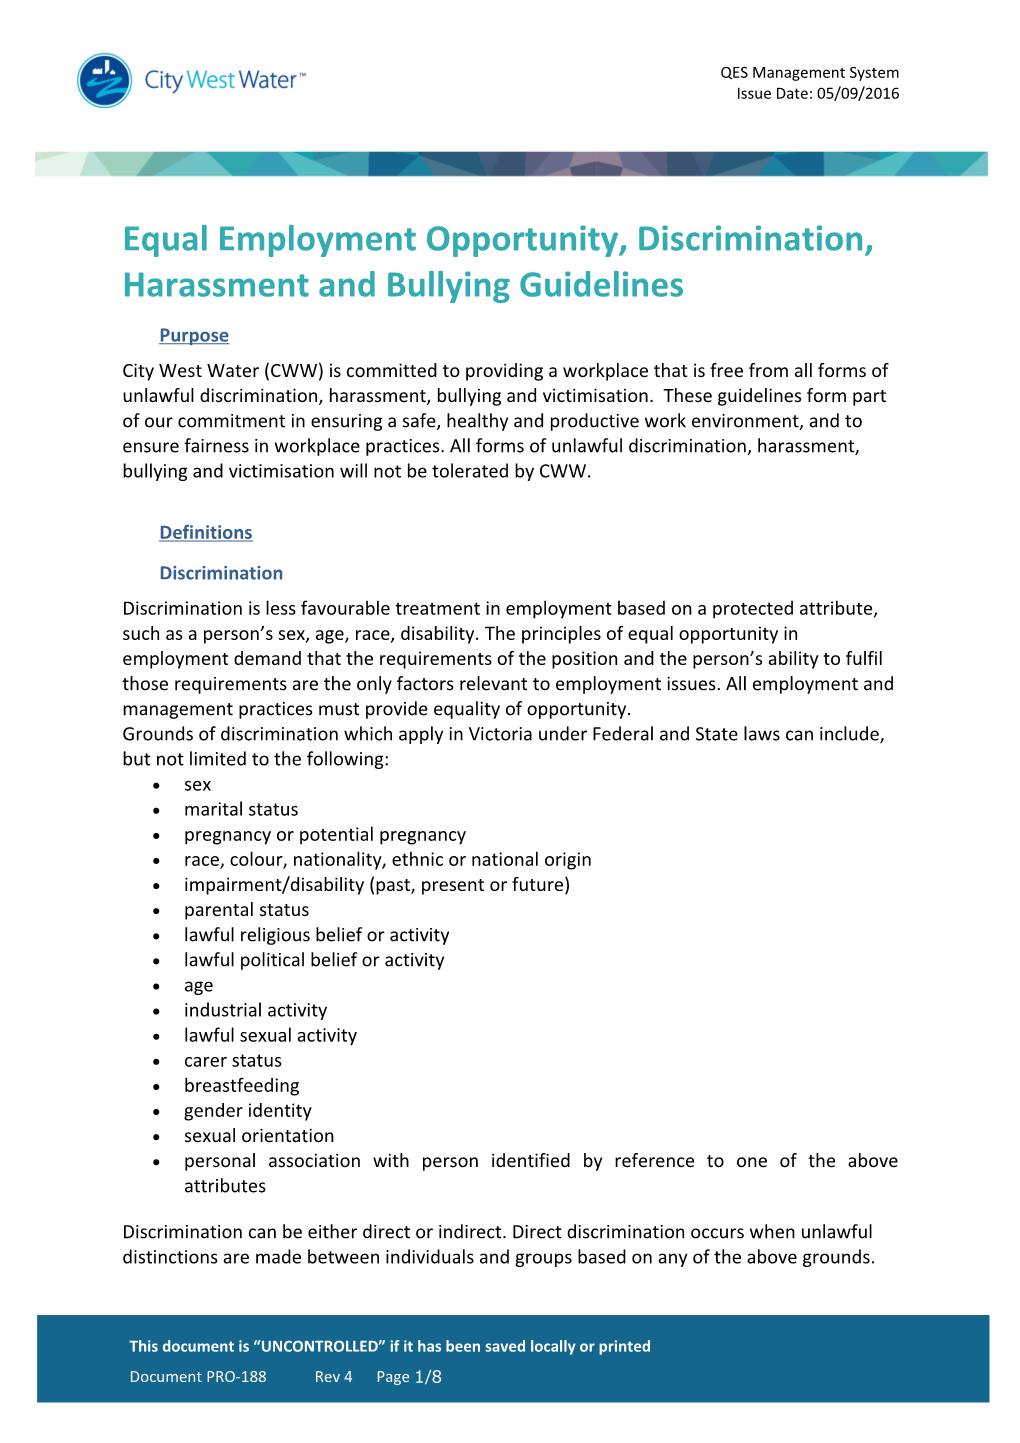 Equal Employment Opportunity Policy - City West Water